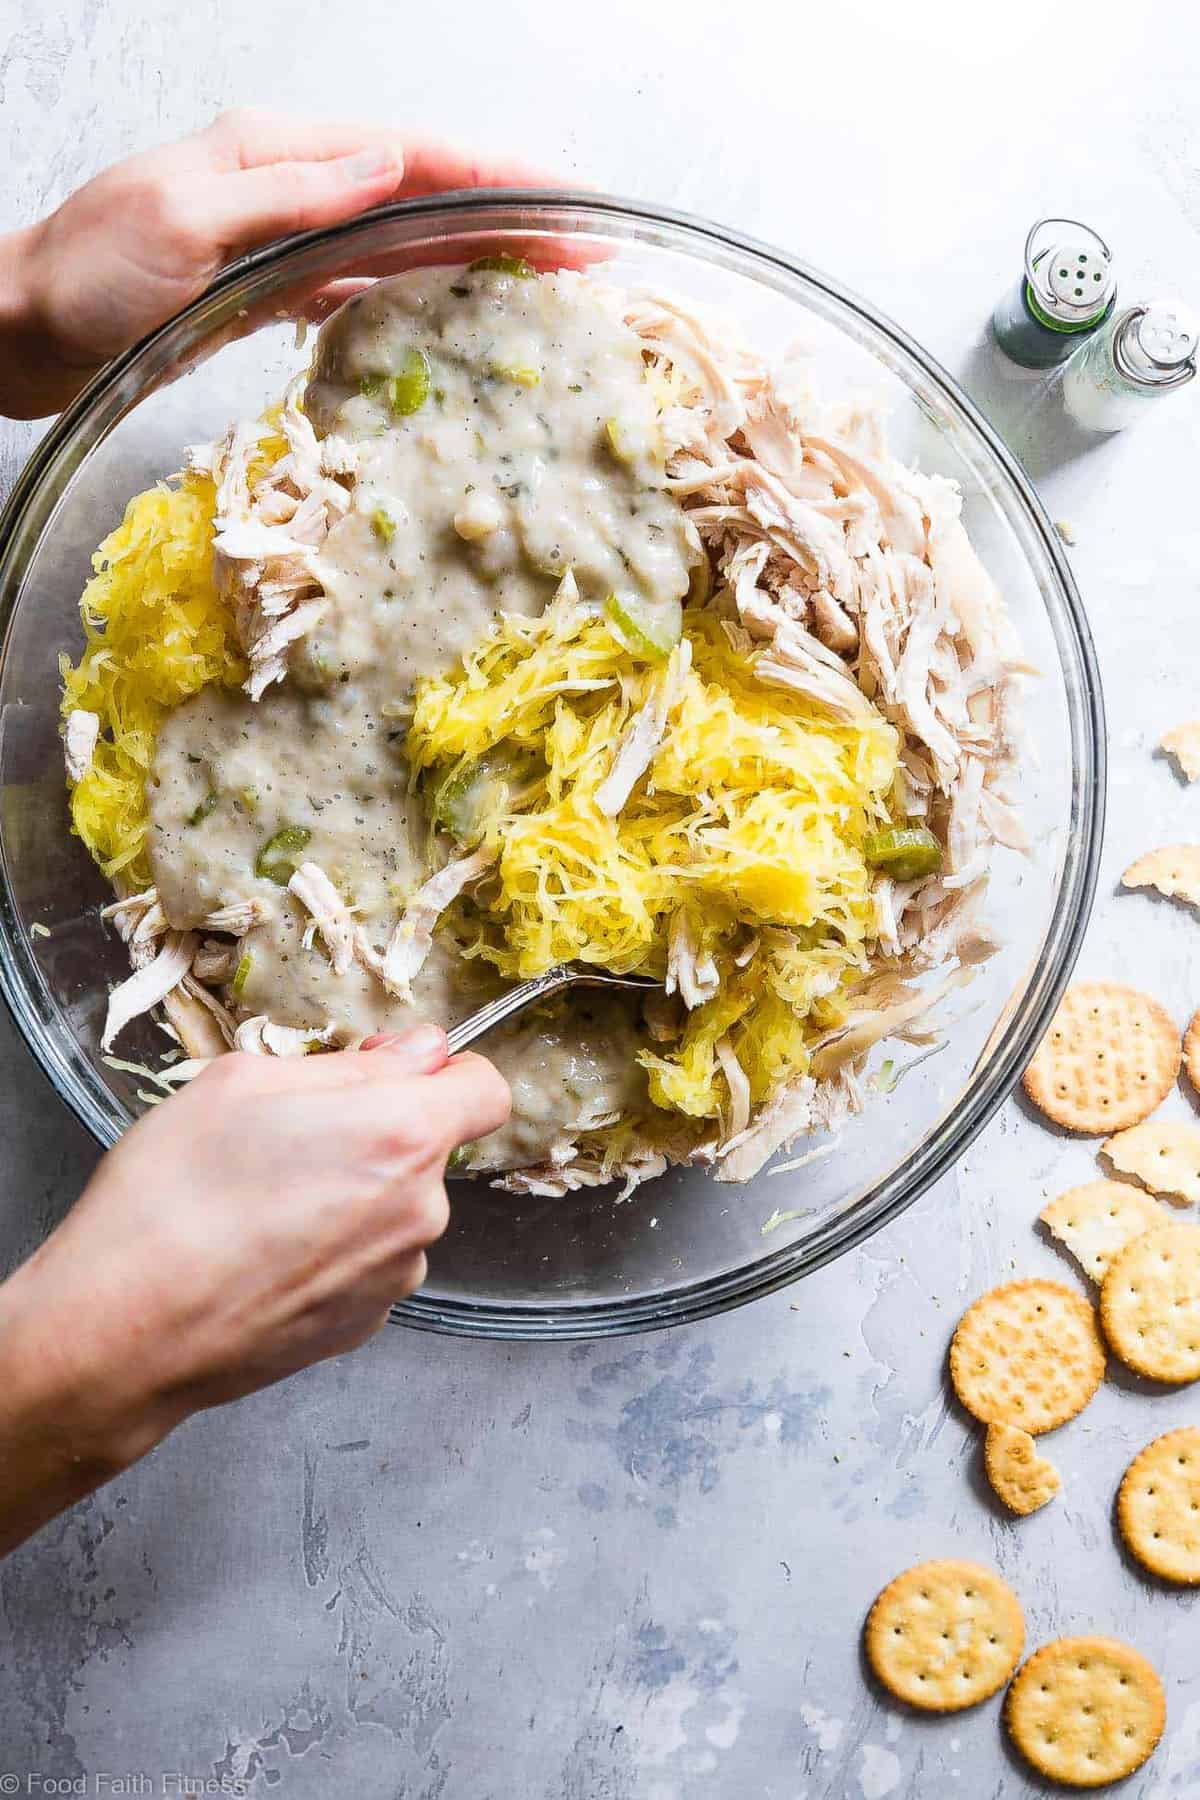 Healthy Easy Chicken Noodle Casserole - This Healthy Chicken Noodle bake uses spaghetti squash so it's gluten free and dairy free! Homemade condensed chicken soup makes it SO creamy! The best healthy comfort food! | #Foodfaithfitness | #Glutenfree #Healthy #Dairyfree #Spaghettisquash #Casserole